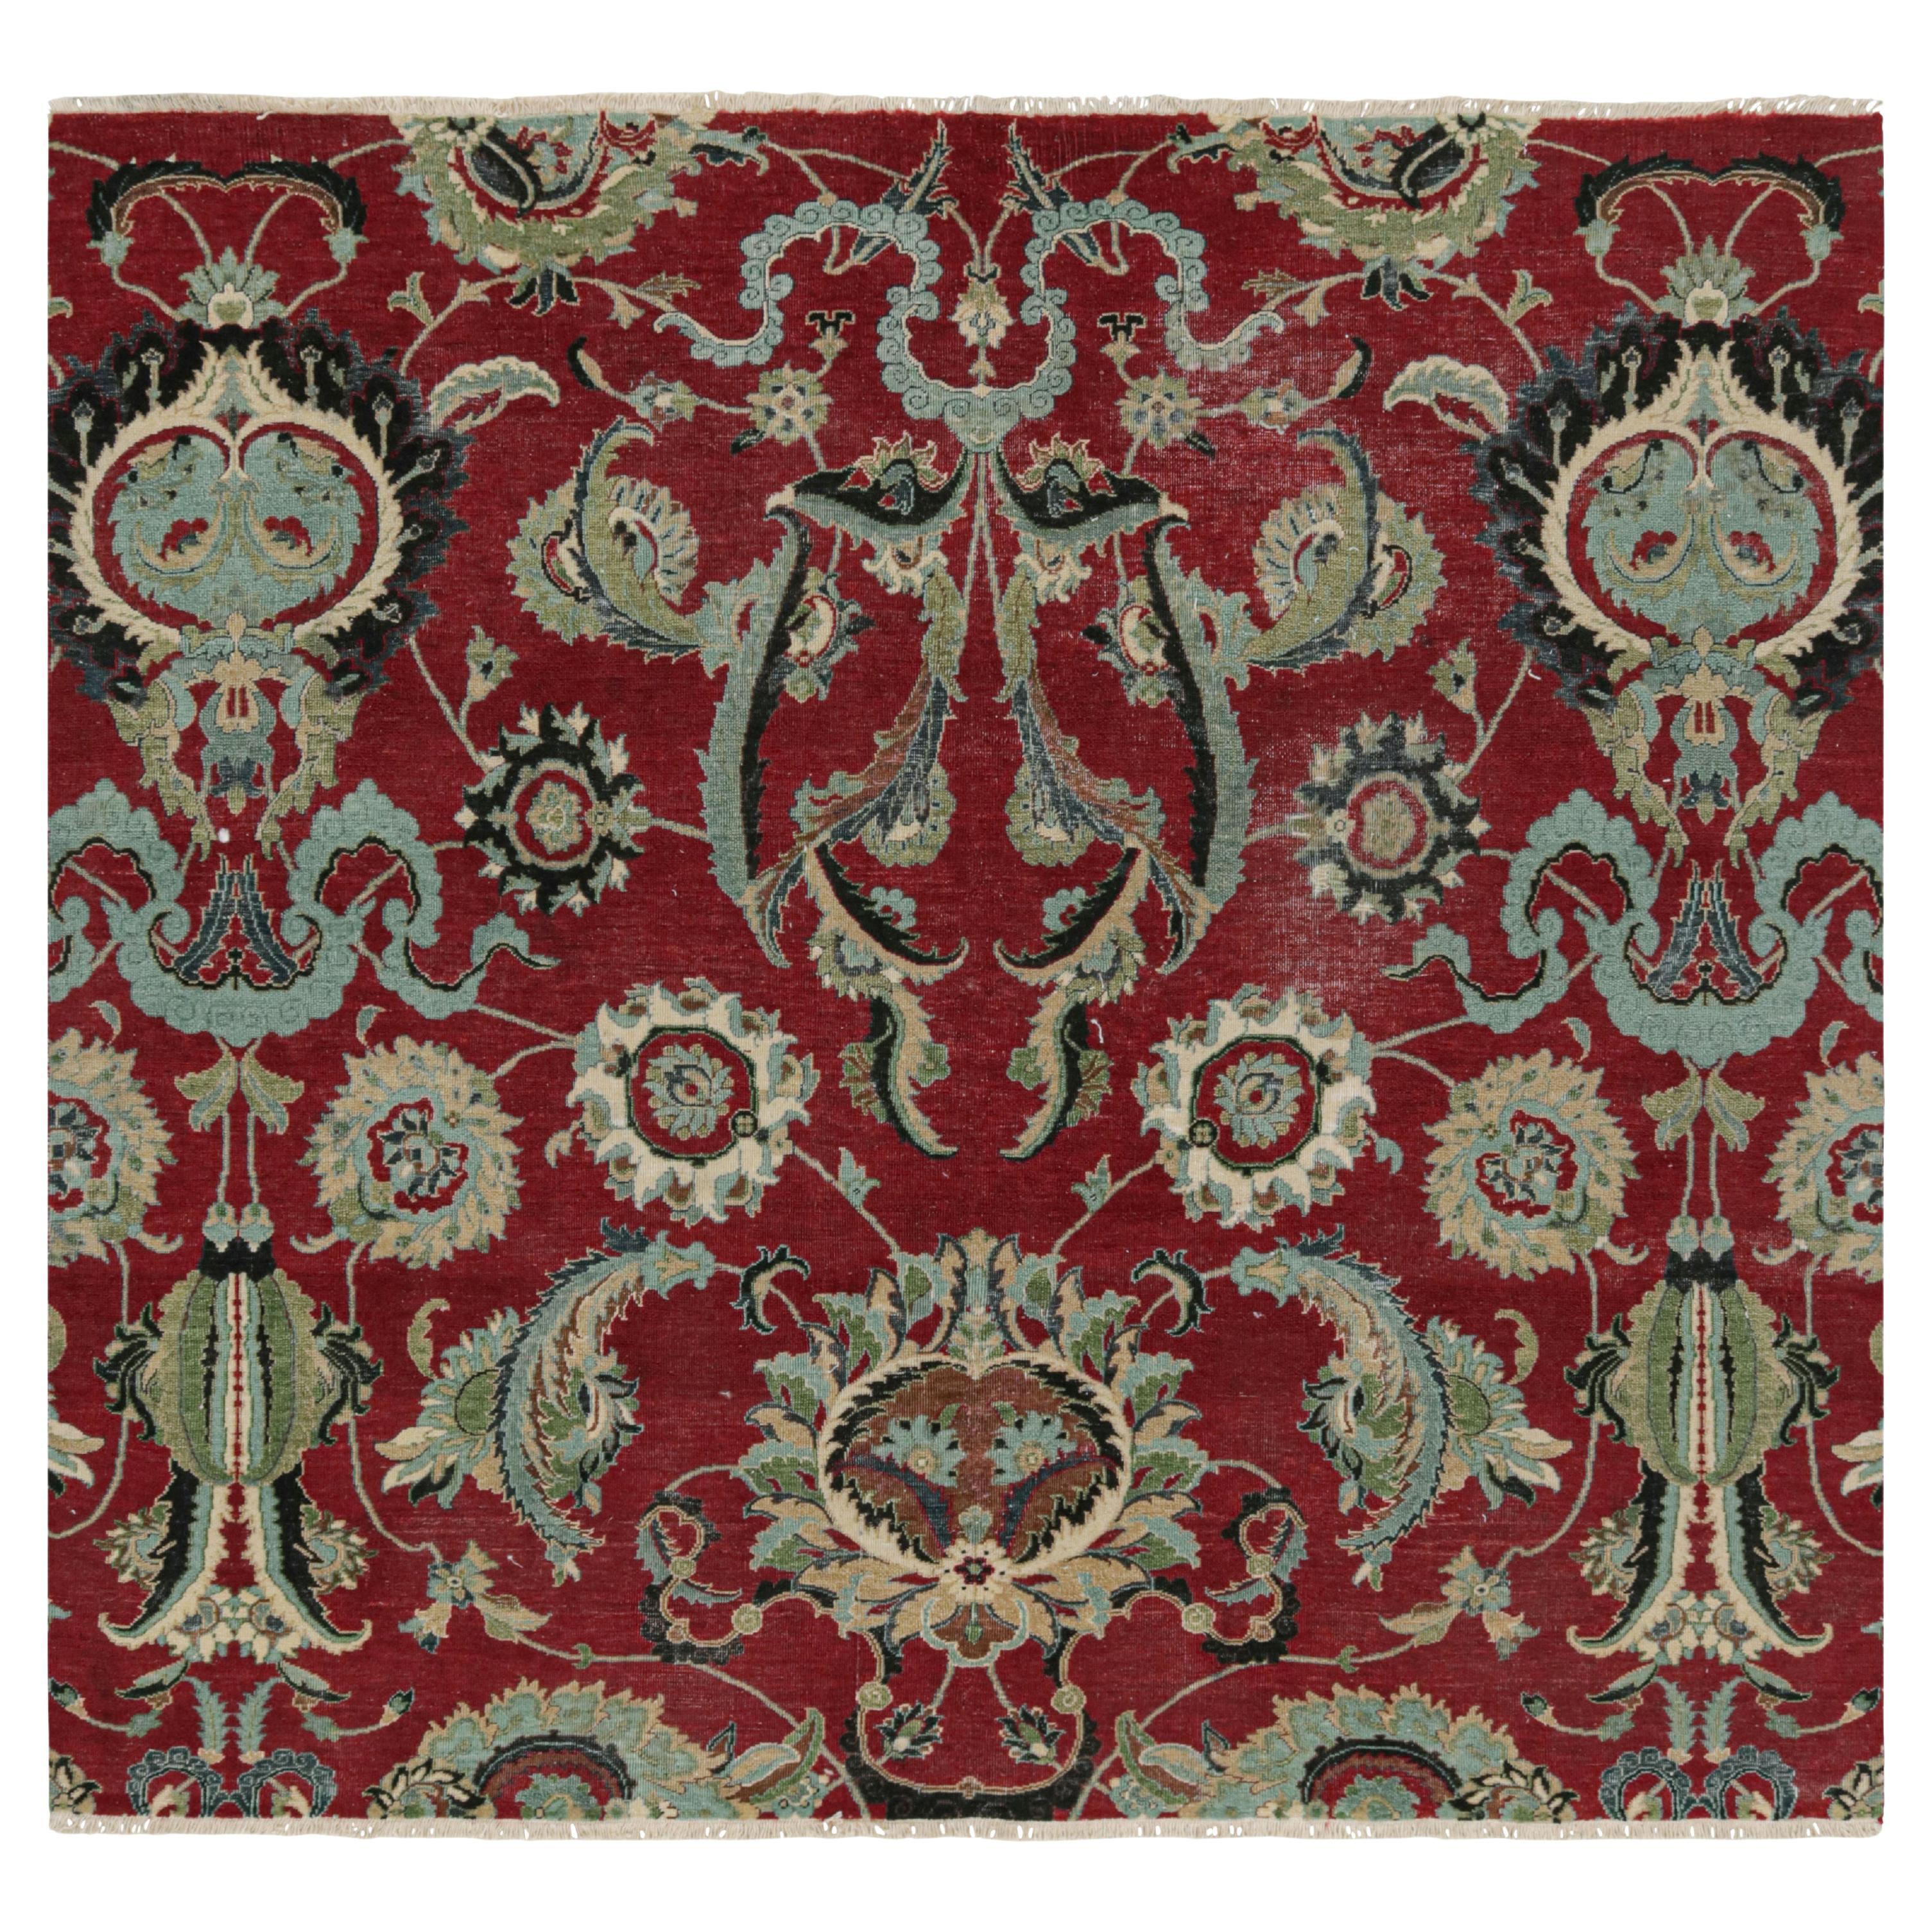 Rug & Kilim’s Persian Isfahan Style Square Rug in Burgundy with Floral Patterns For Sale